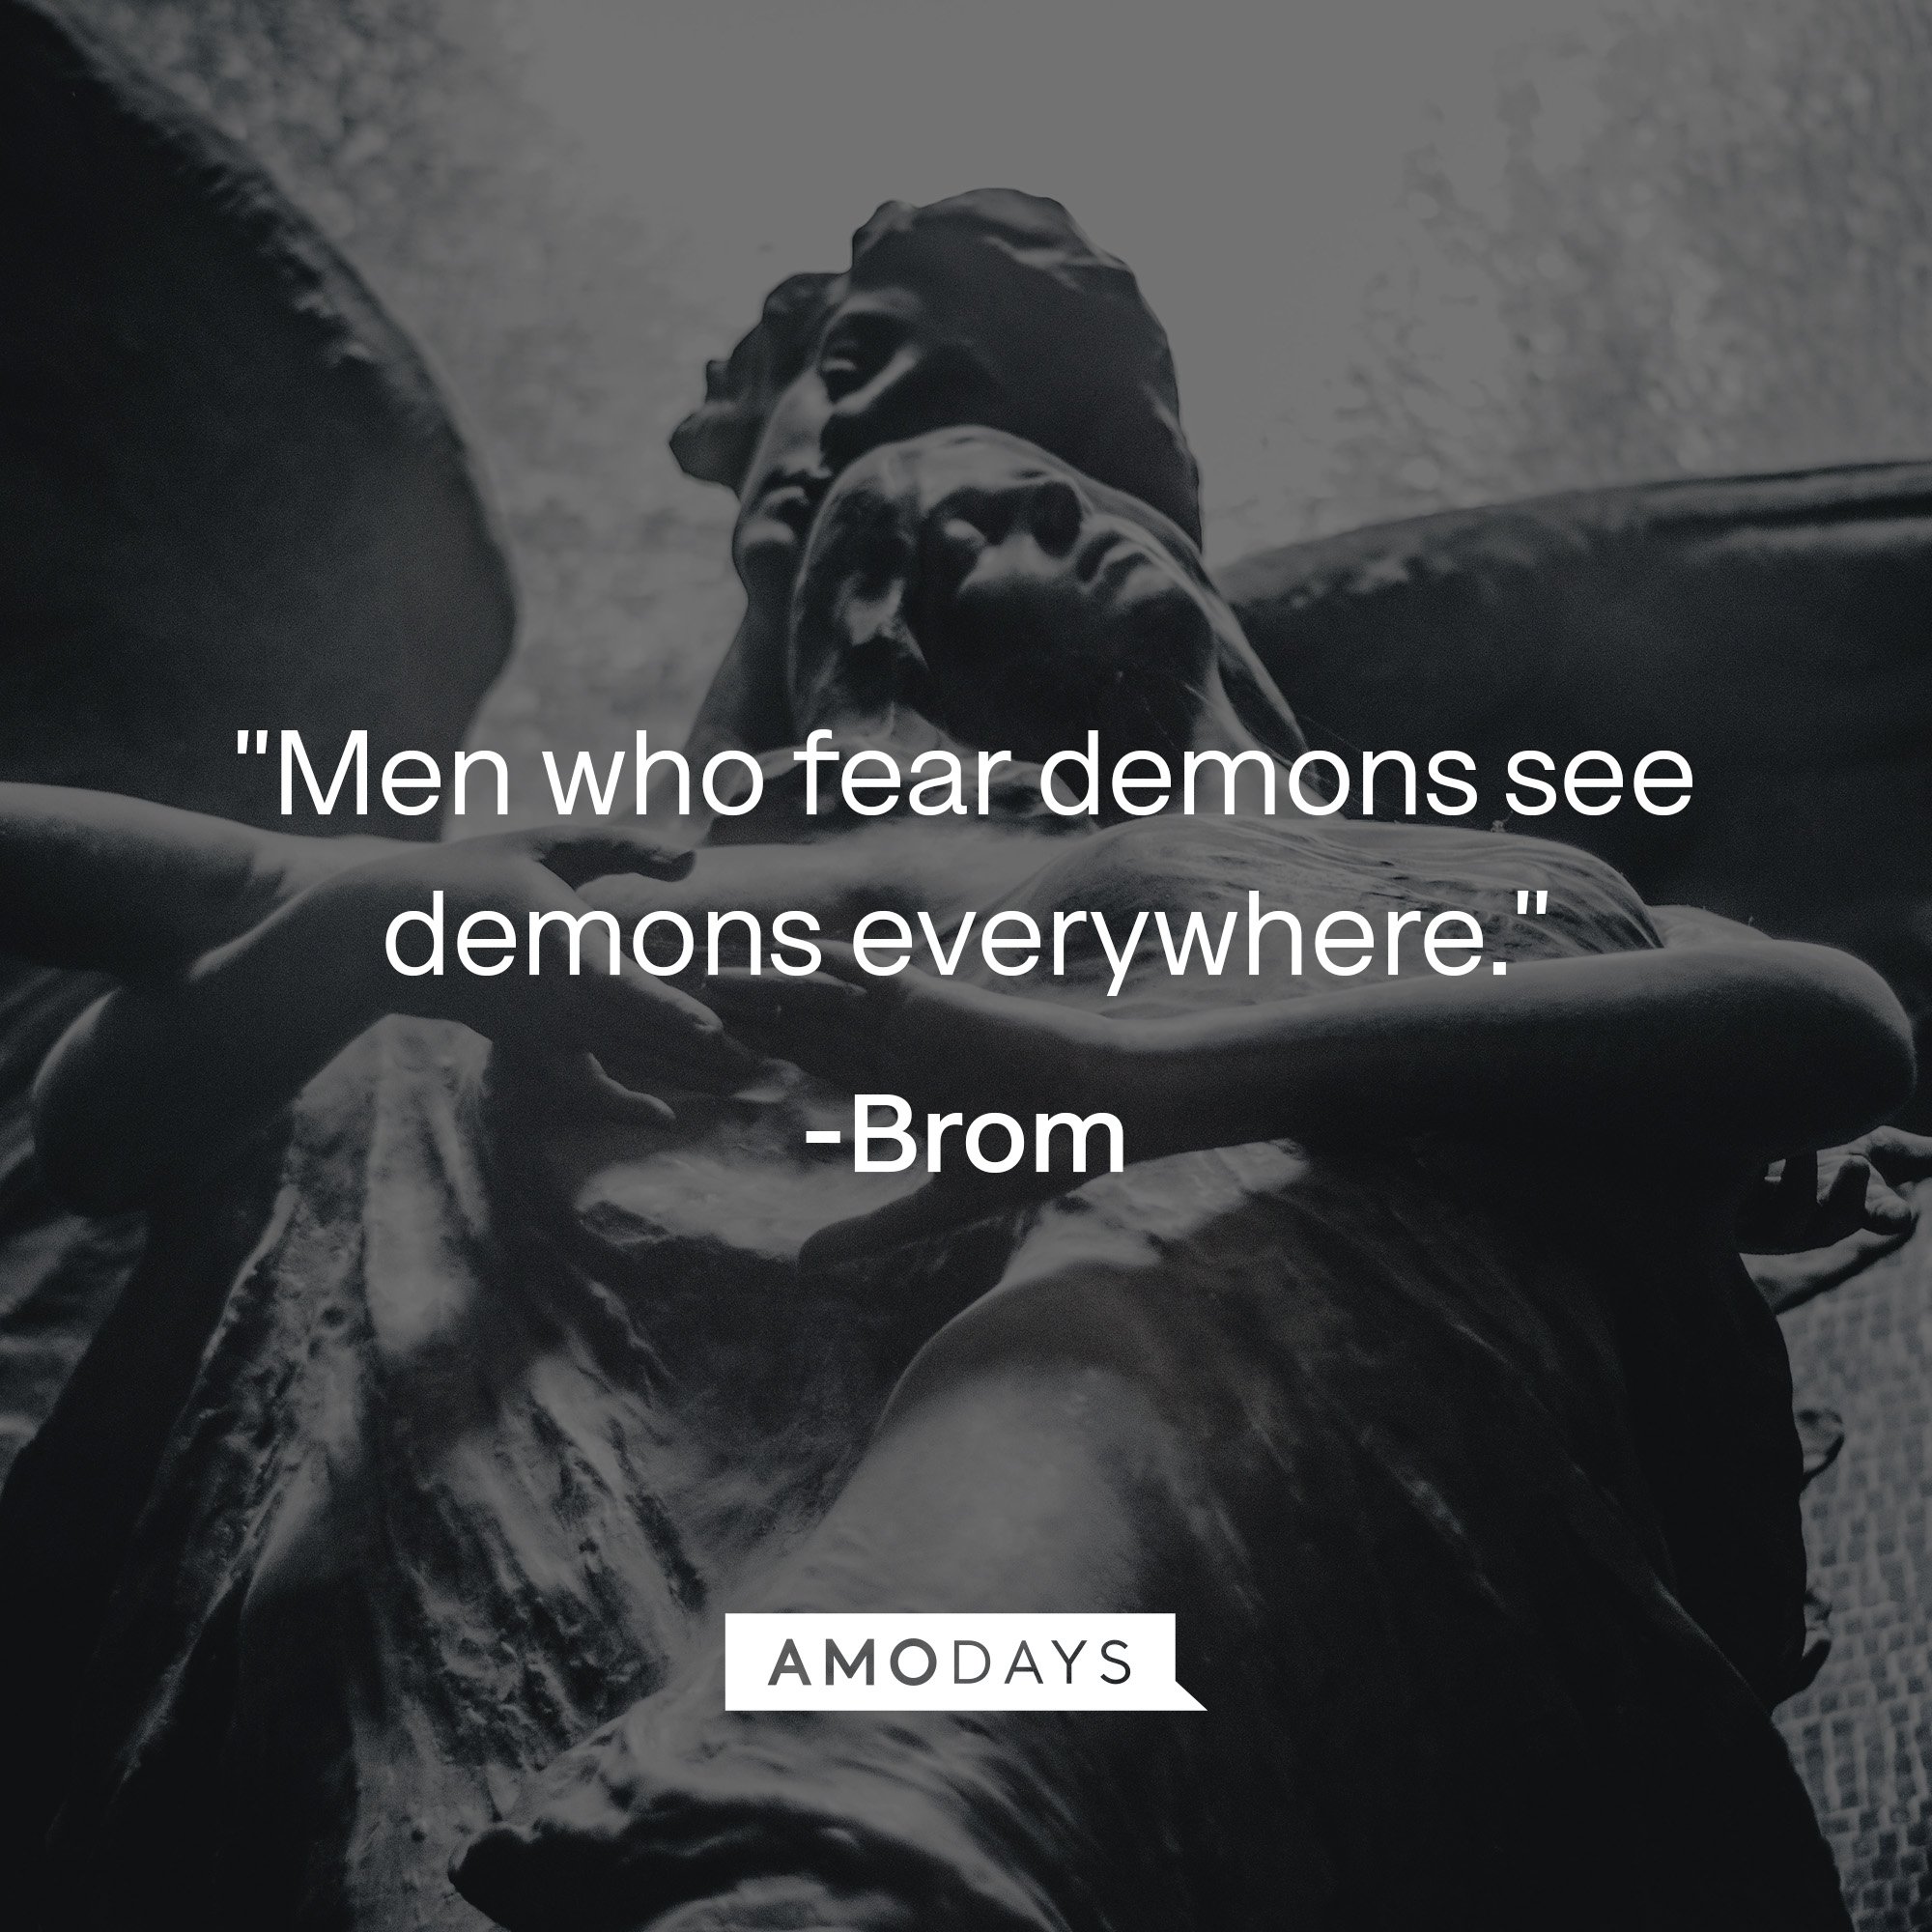  Brom’s quote: "Men who fear demons see demons everywhere." | Image: AmoDays